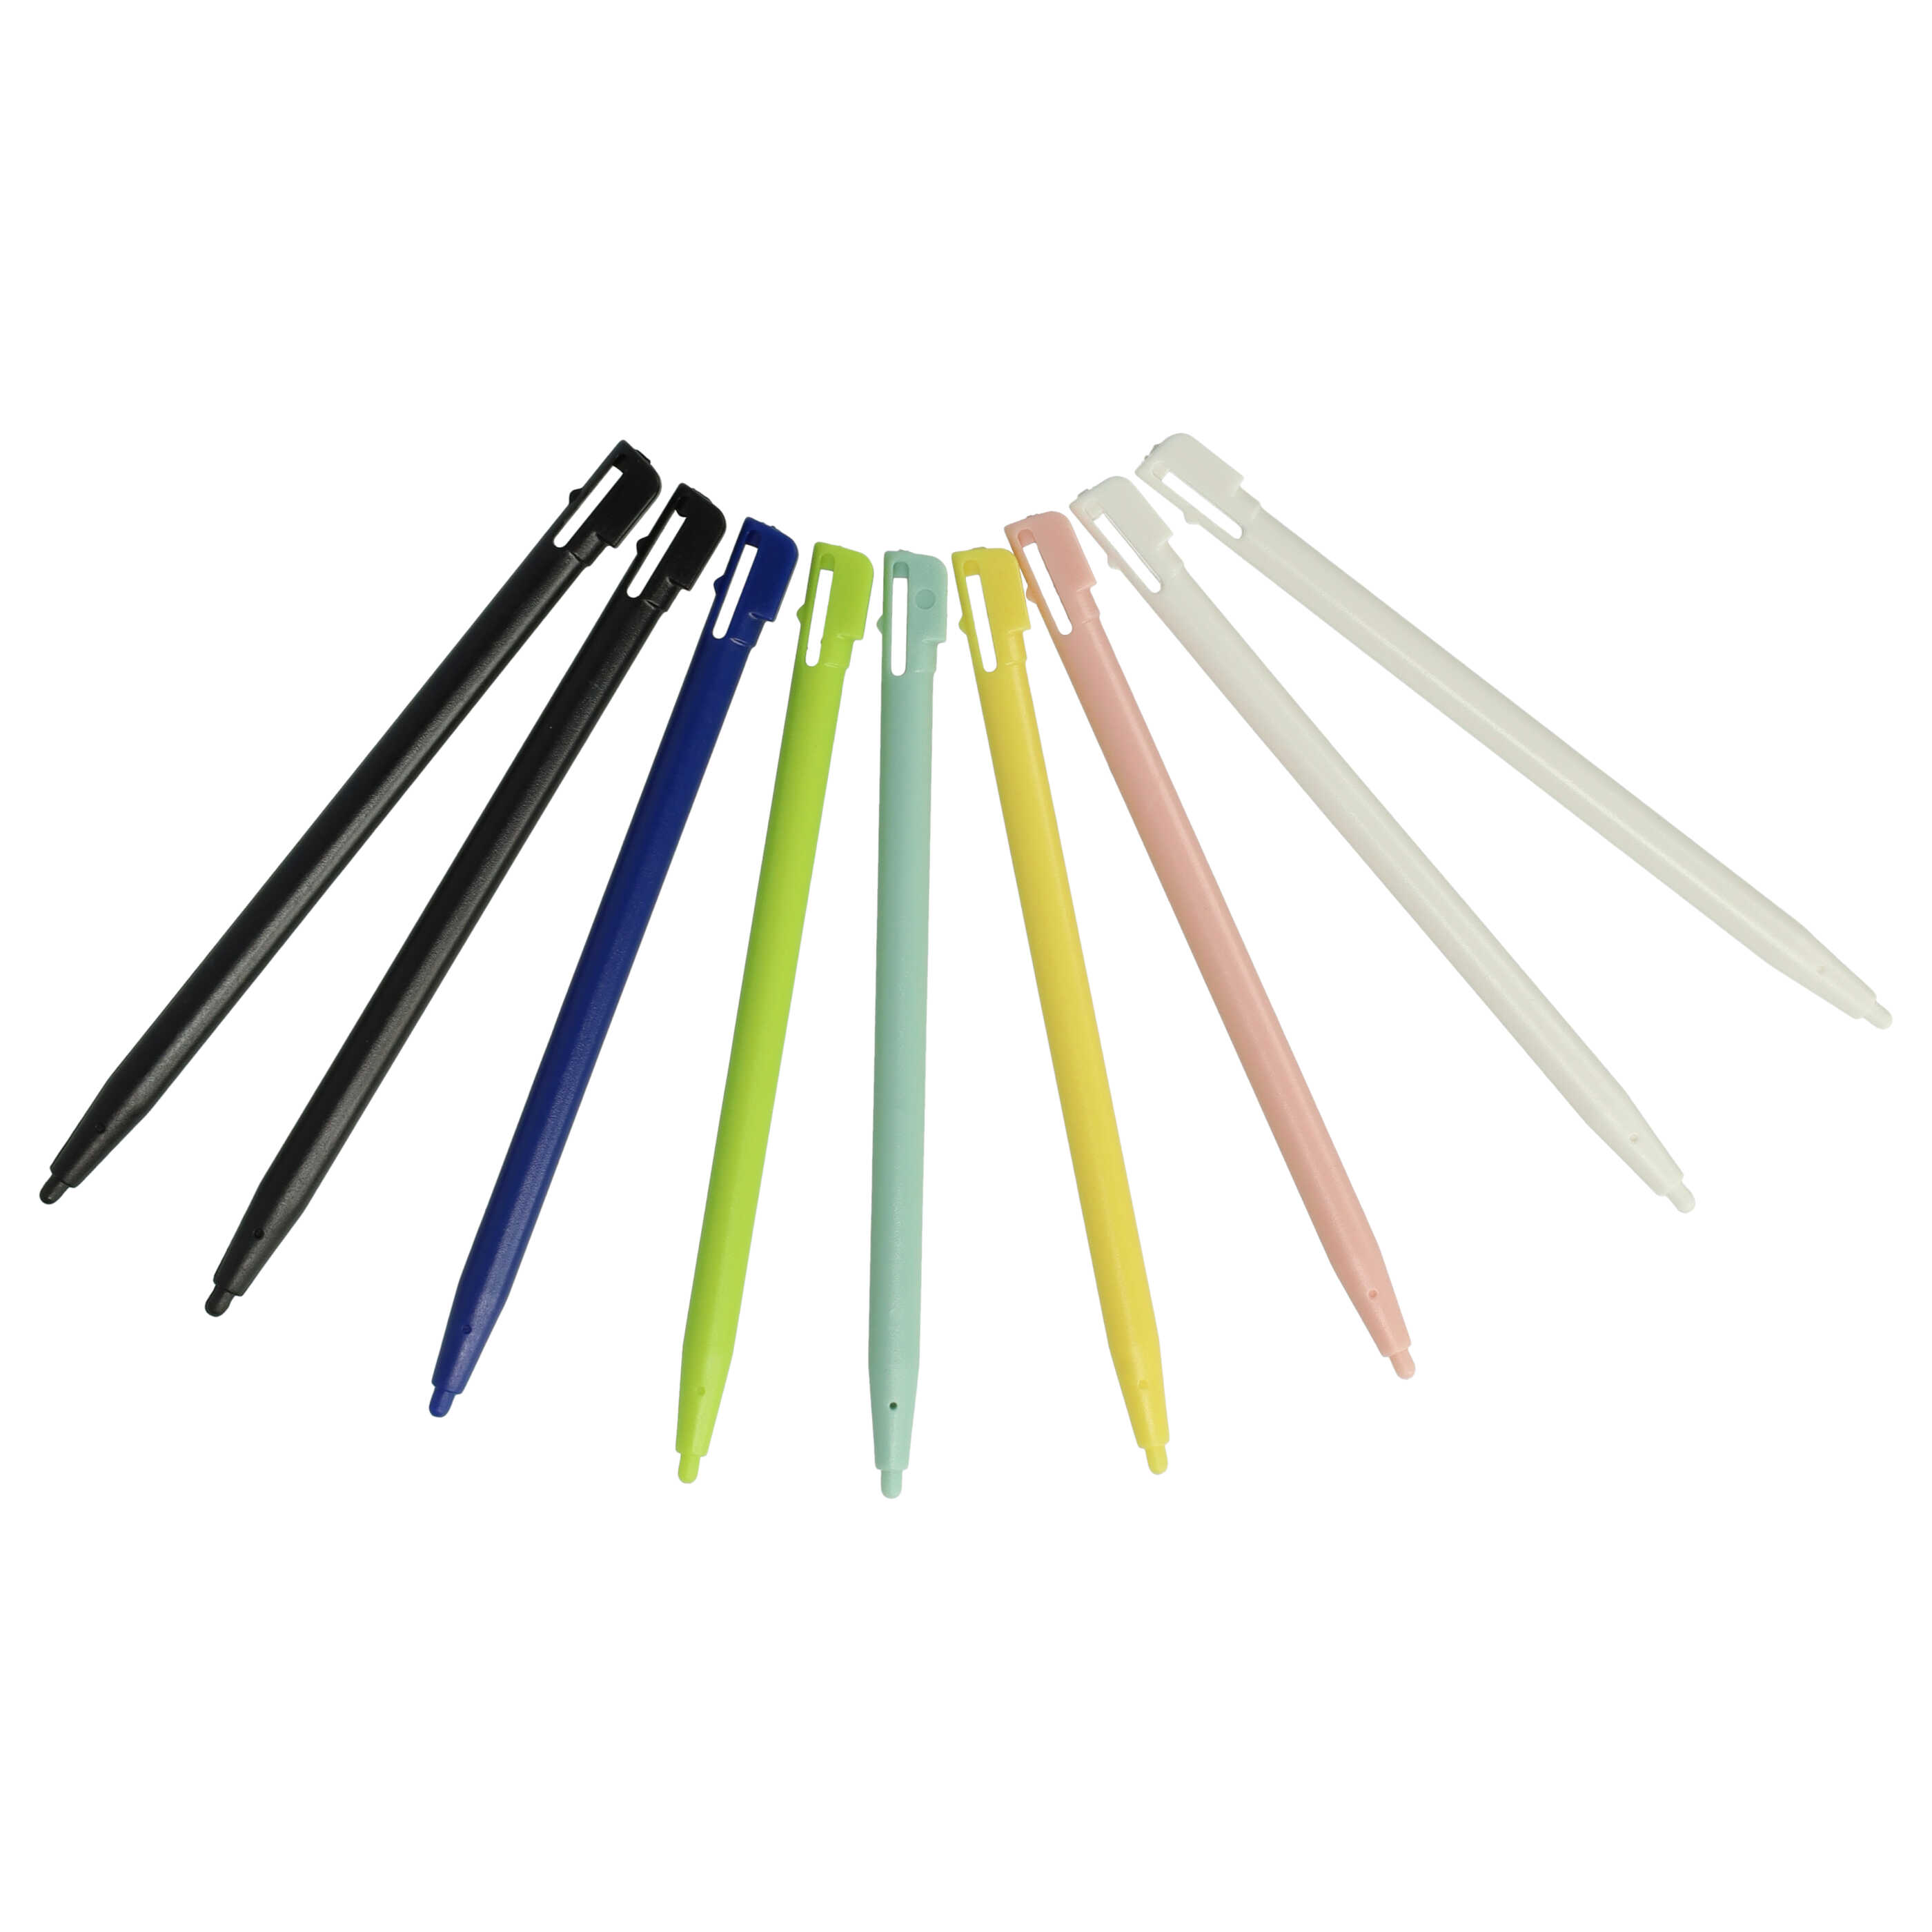 10x Touch Pens suitable for Nintendo DSi, DSi XL, DS Lite Game Console - blue, yellow, green, pink, red, black